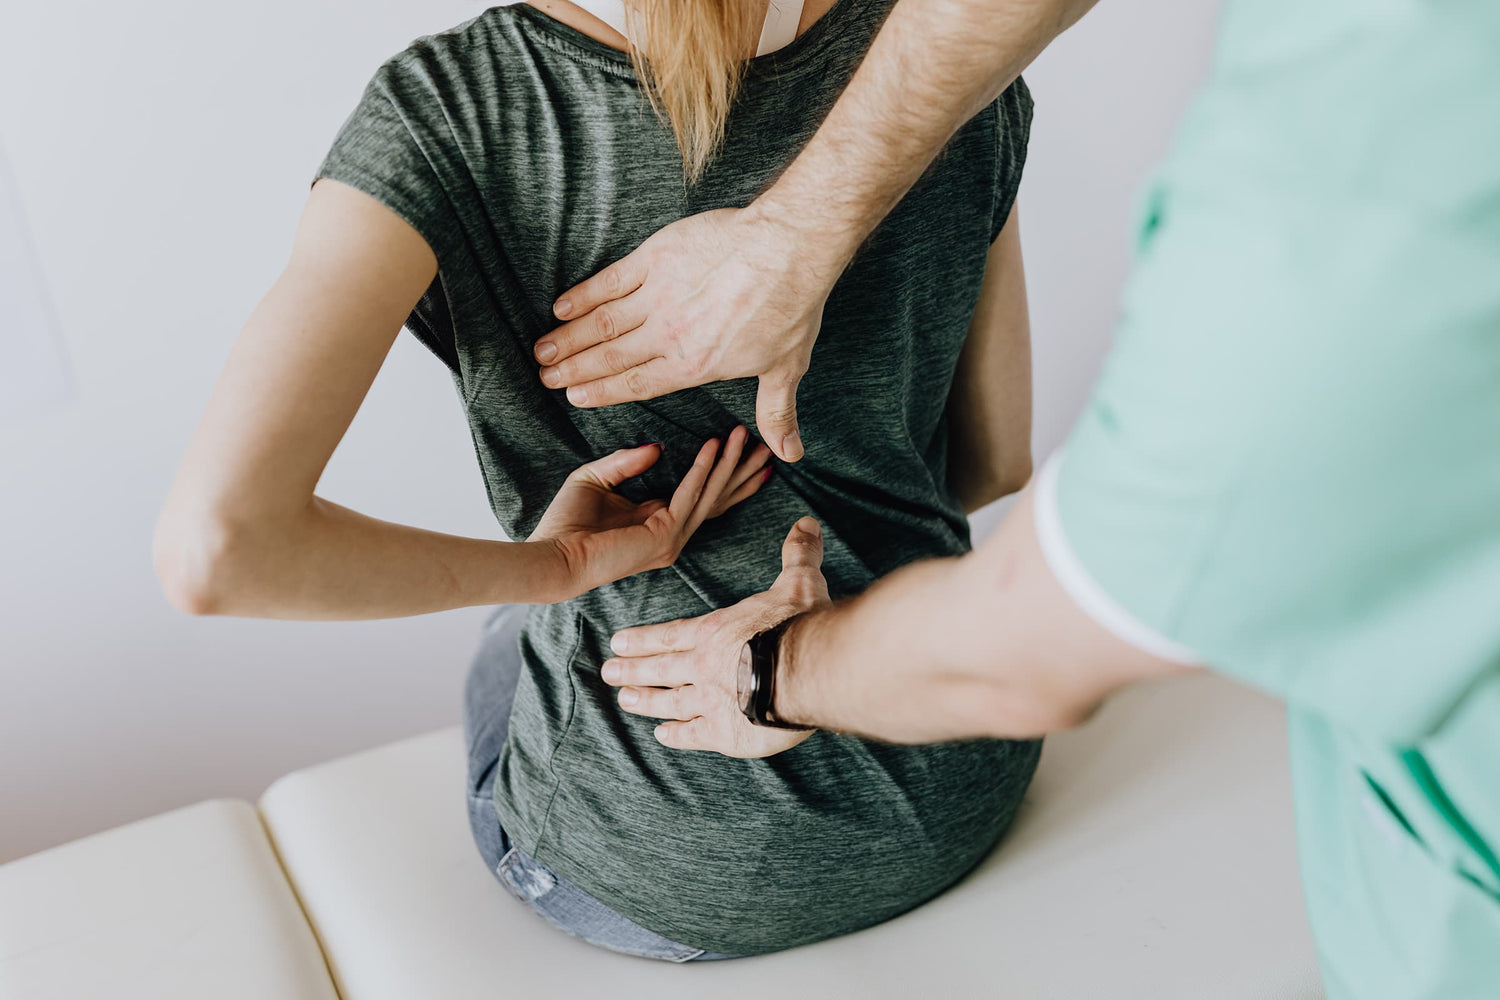 hands on a person's back providing relief from back pain treatment